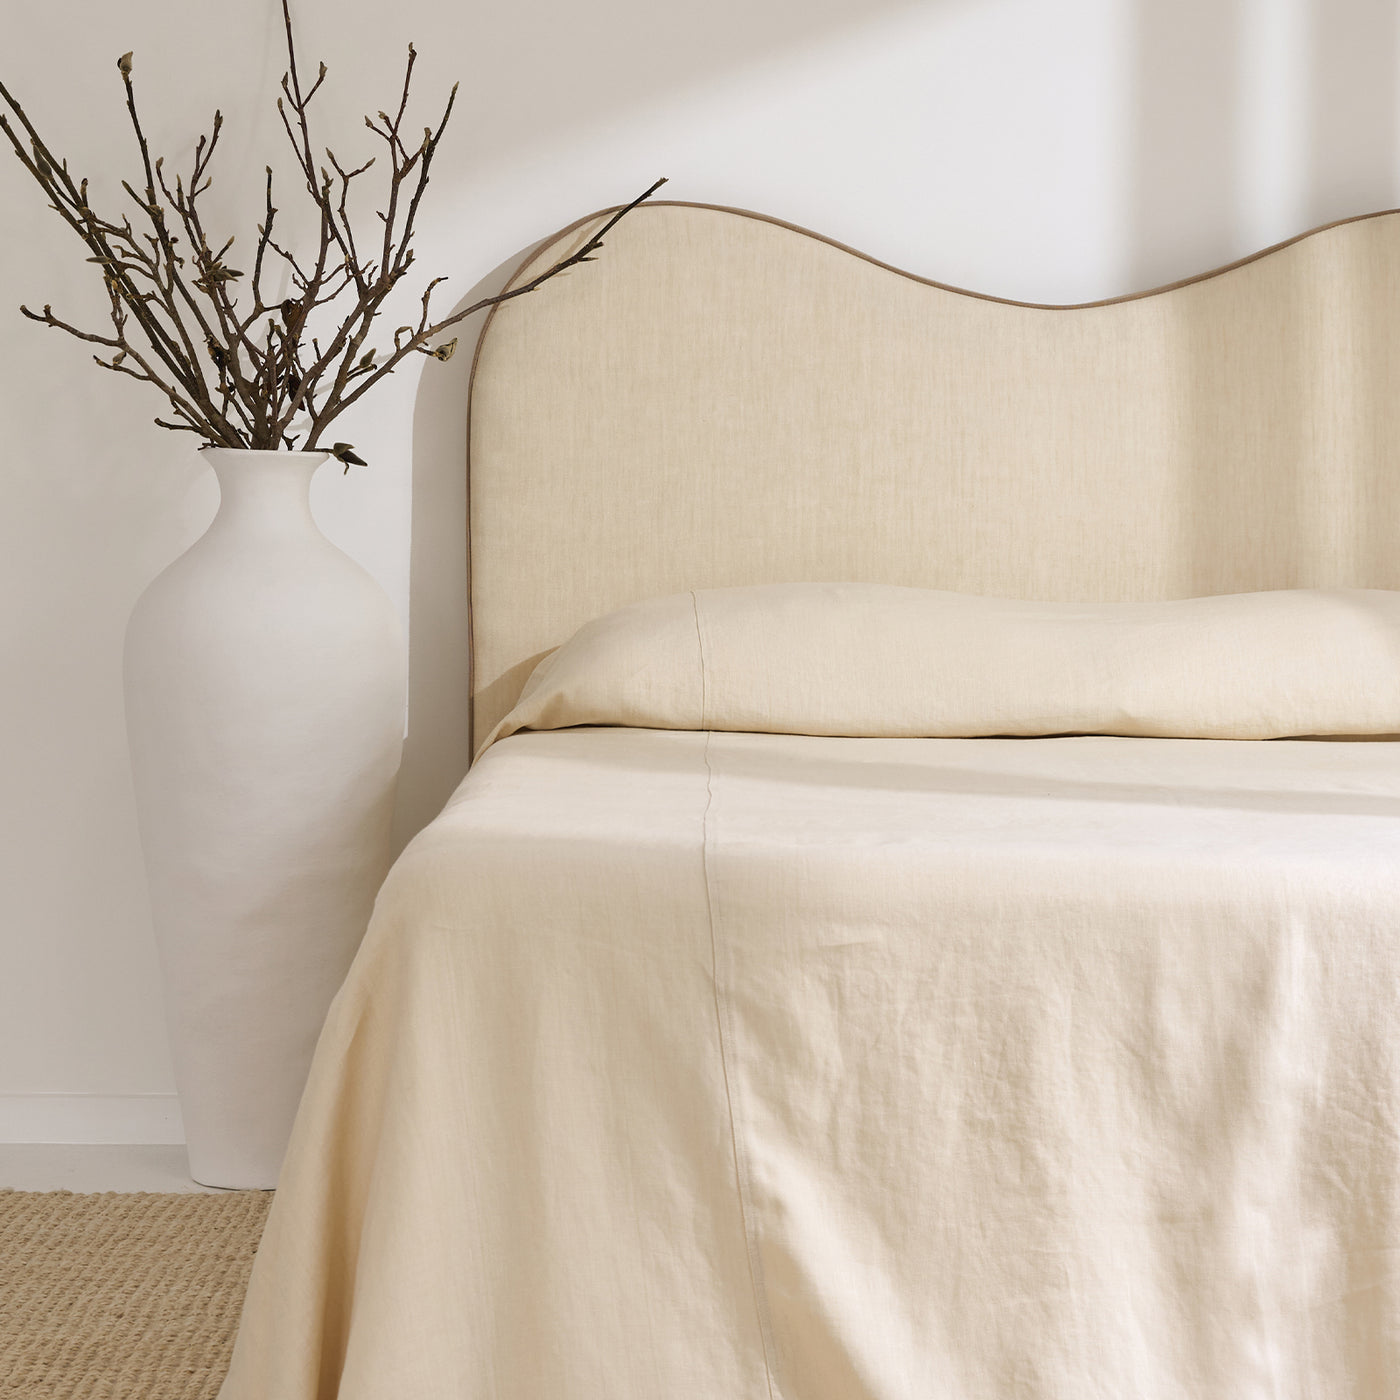 French Flax Linen Heavy Bedcover in Creme